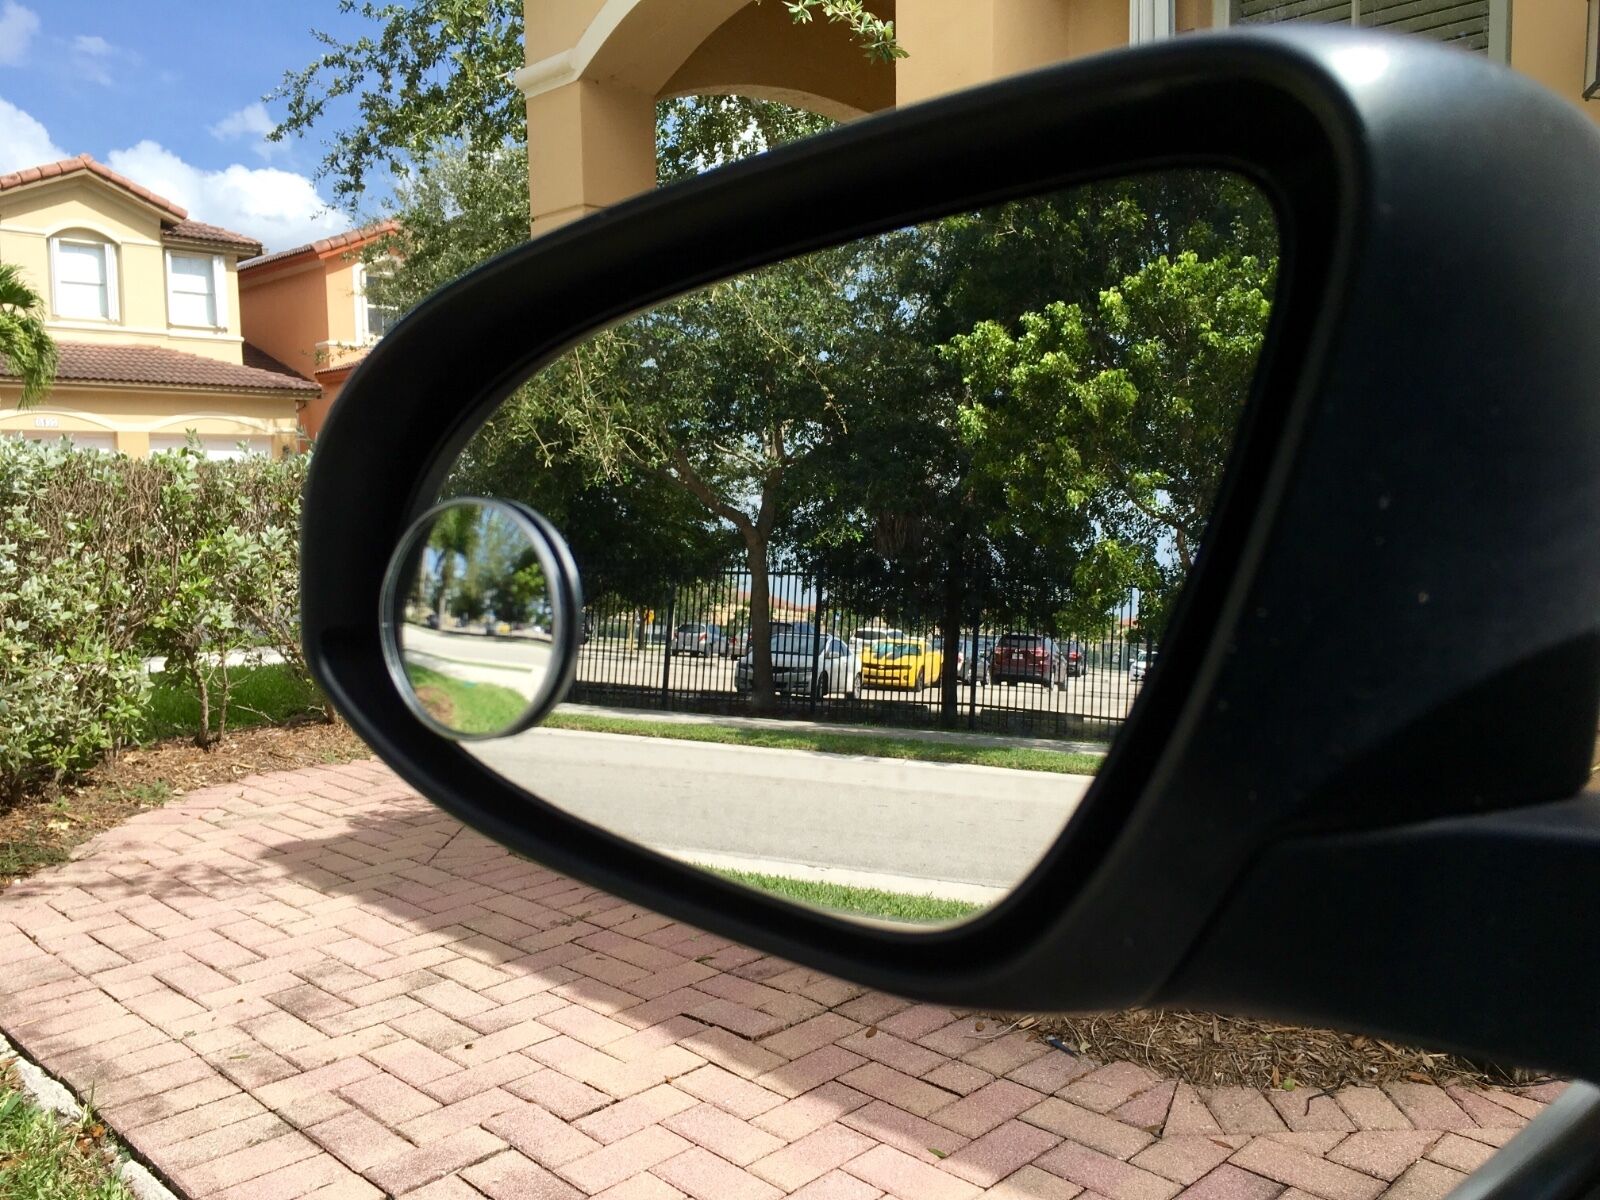 2 Pack Blind Spot Mirrors HD 2 Fixed Round Glass Blind Spot Mirror Rear View Mirror All Cars